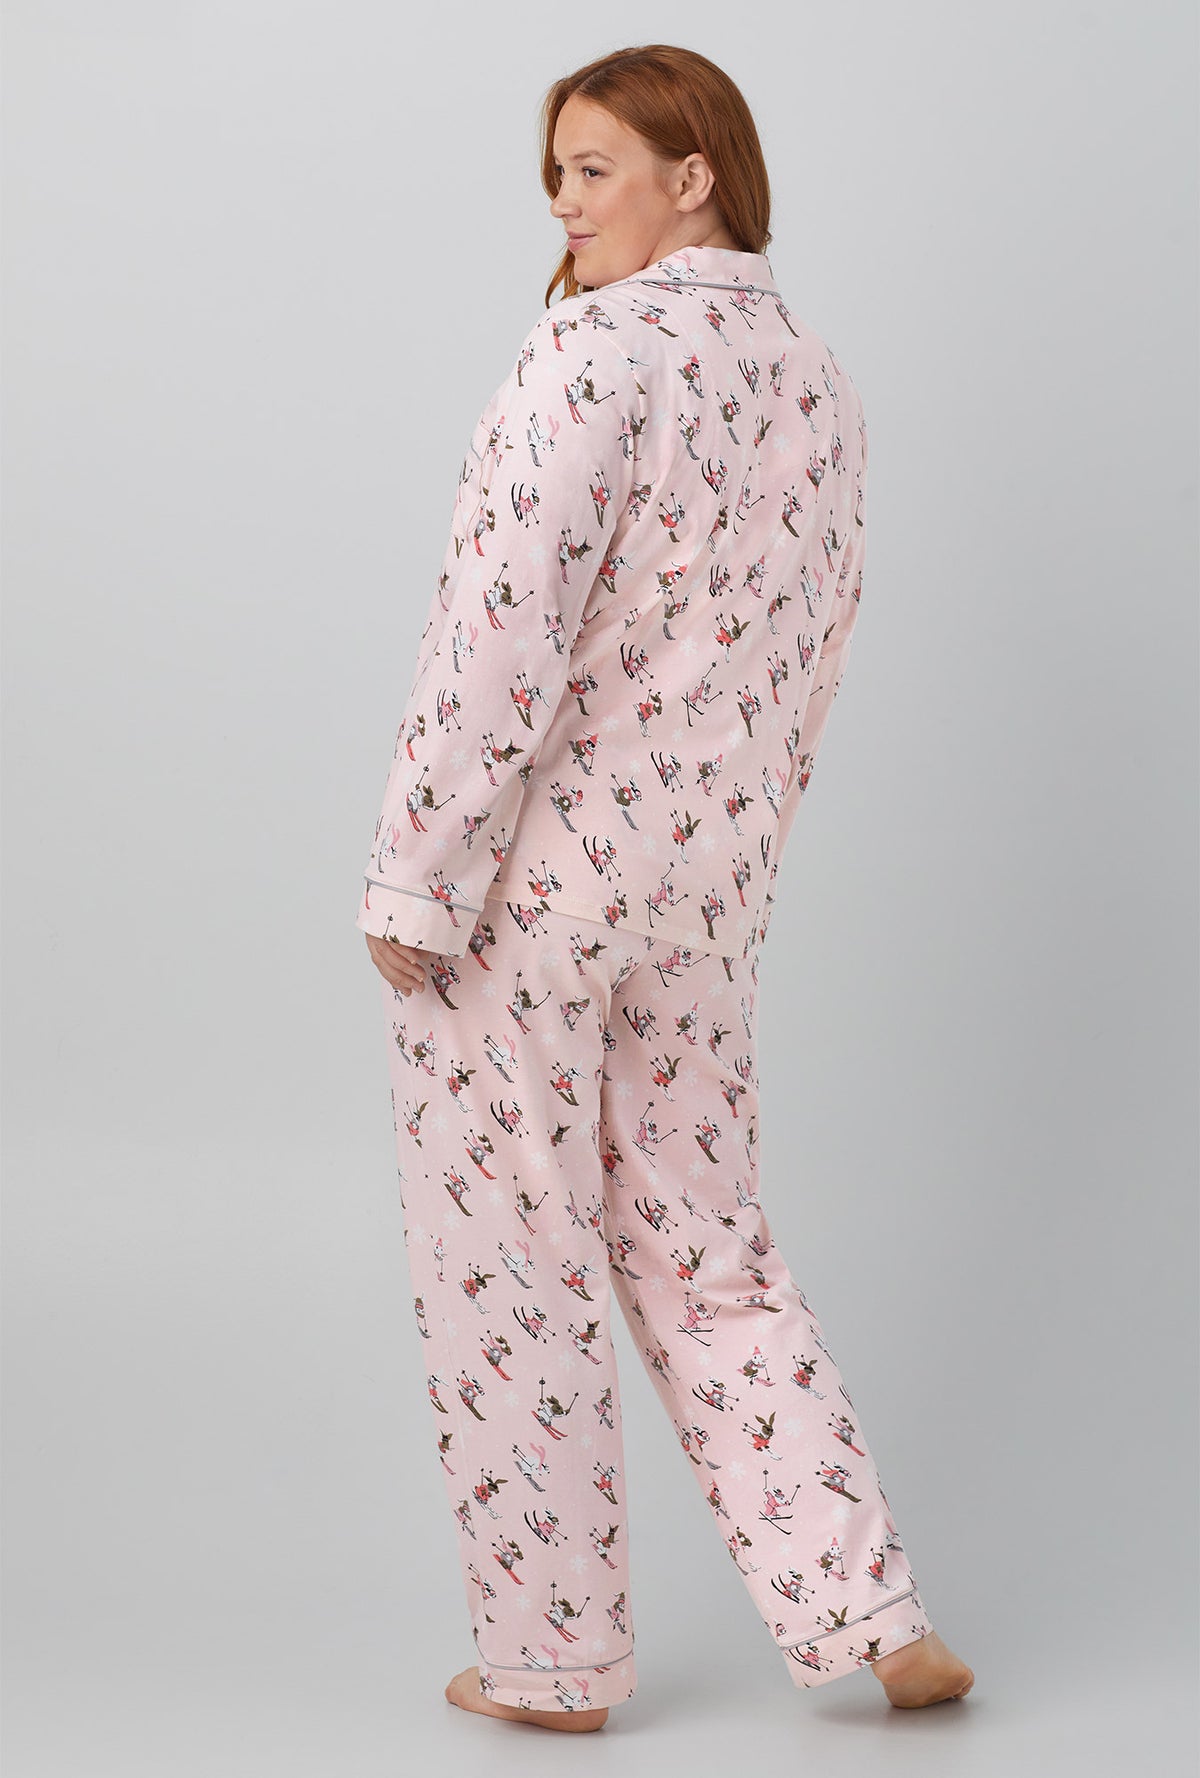 A lady wearing pink long sleeve classic stretch jersey plus pj set with ski bunnies print.